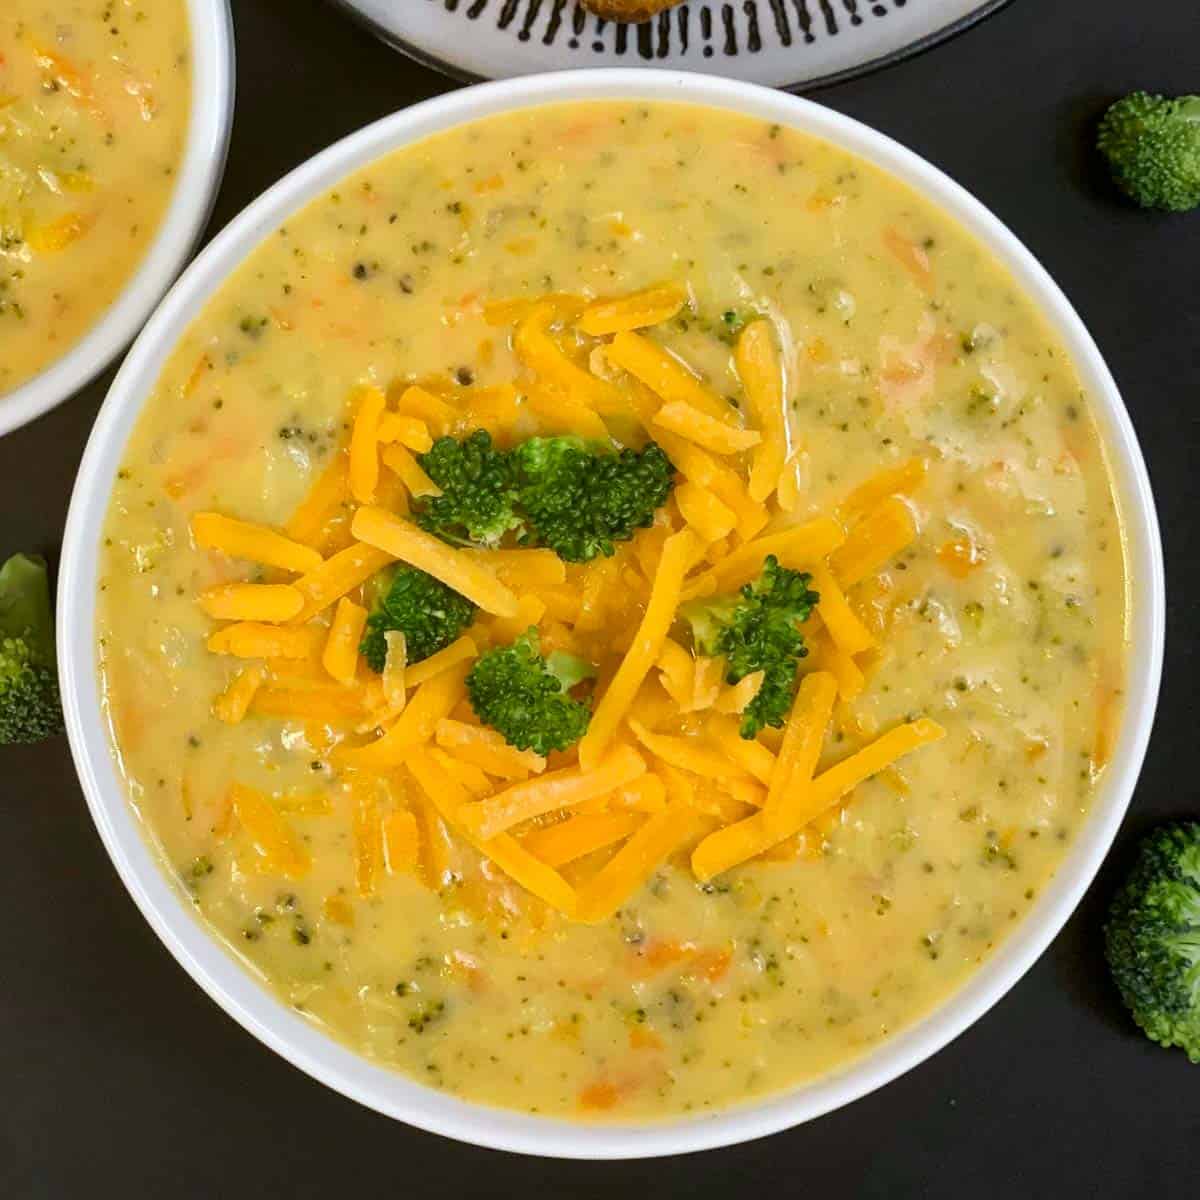 Keto Broccoli Cheese Blender Soup - 4 Ingredients, 10 Minutes!